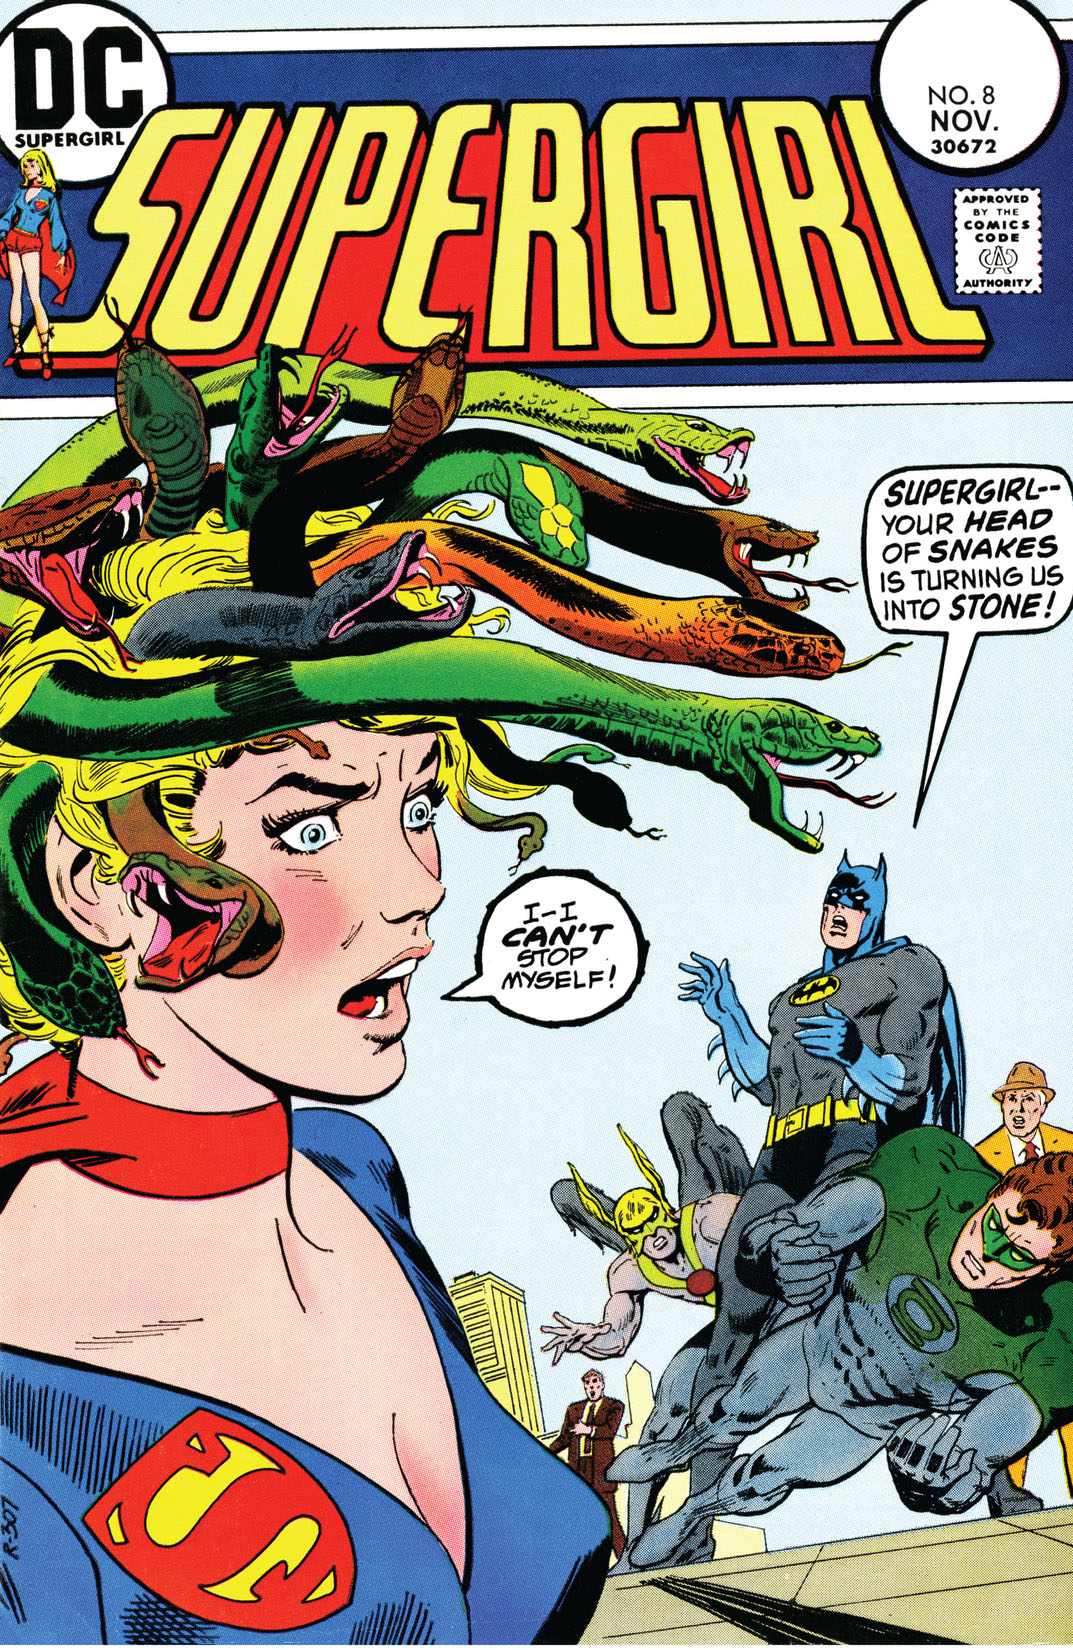 Supergirl (1972-) #8 preview images